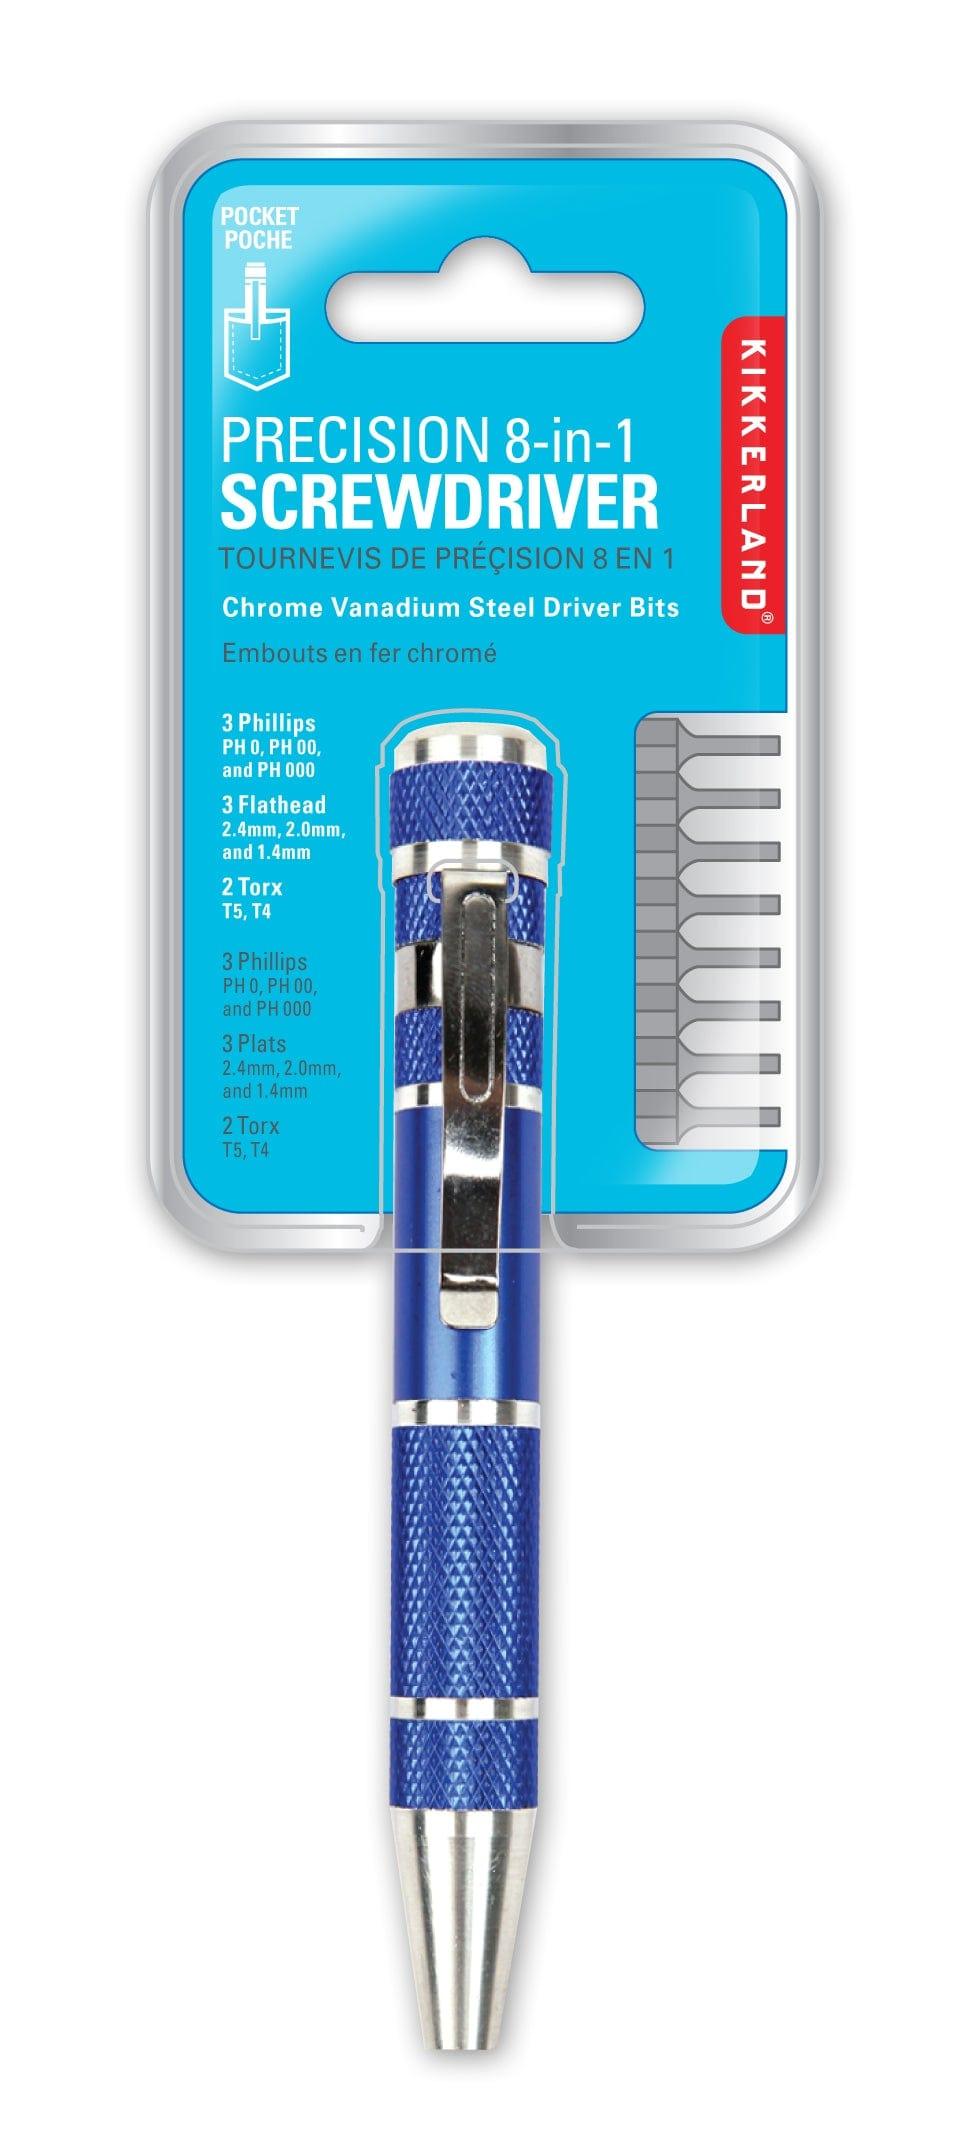 Kikkerland Gifts Precision 8-In-1 Screwdriver